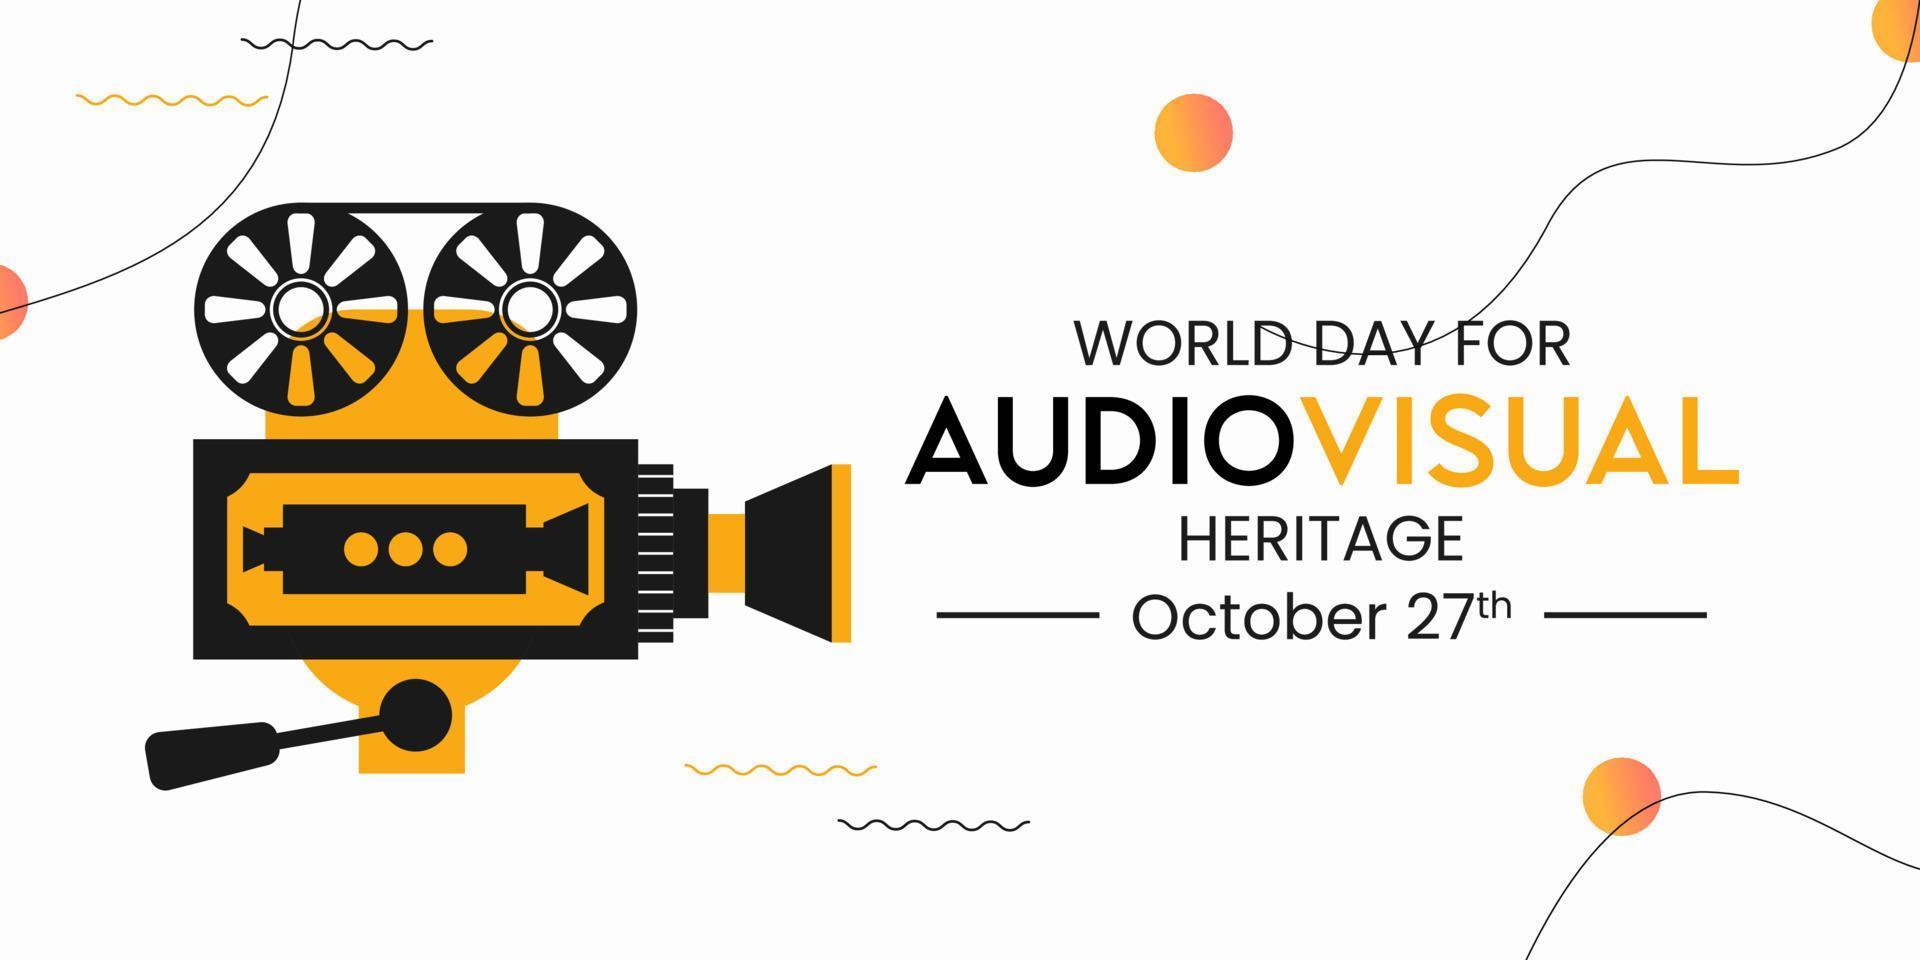 World day for audiovisual heritage. The theme of World Audiovisual heritage day observed each year on October 27 across the globe. vector